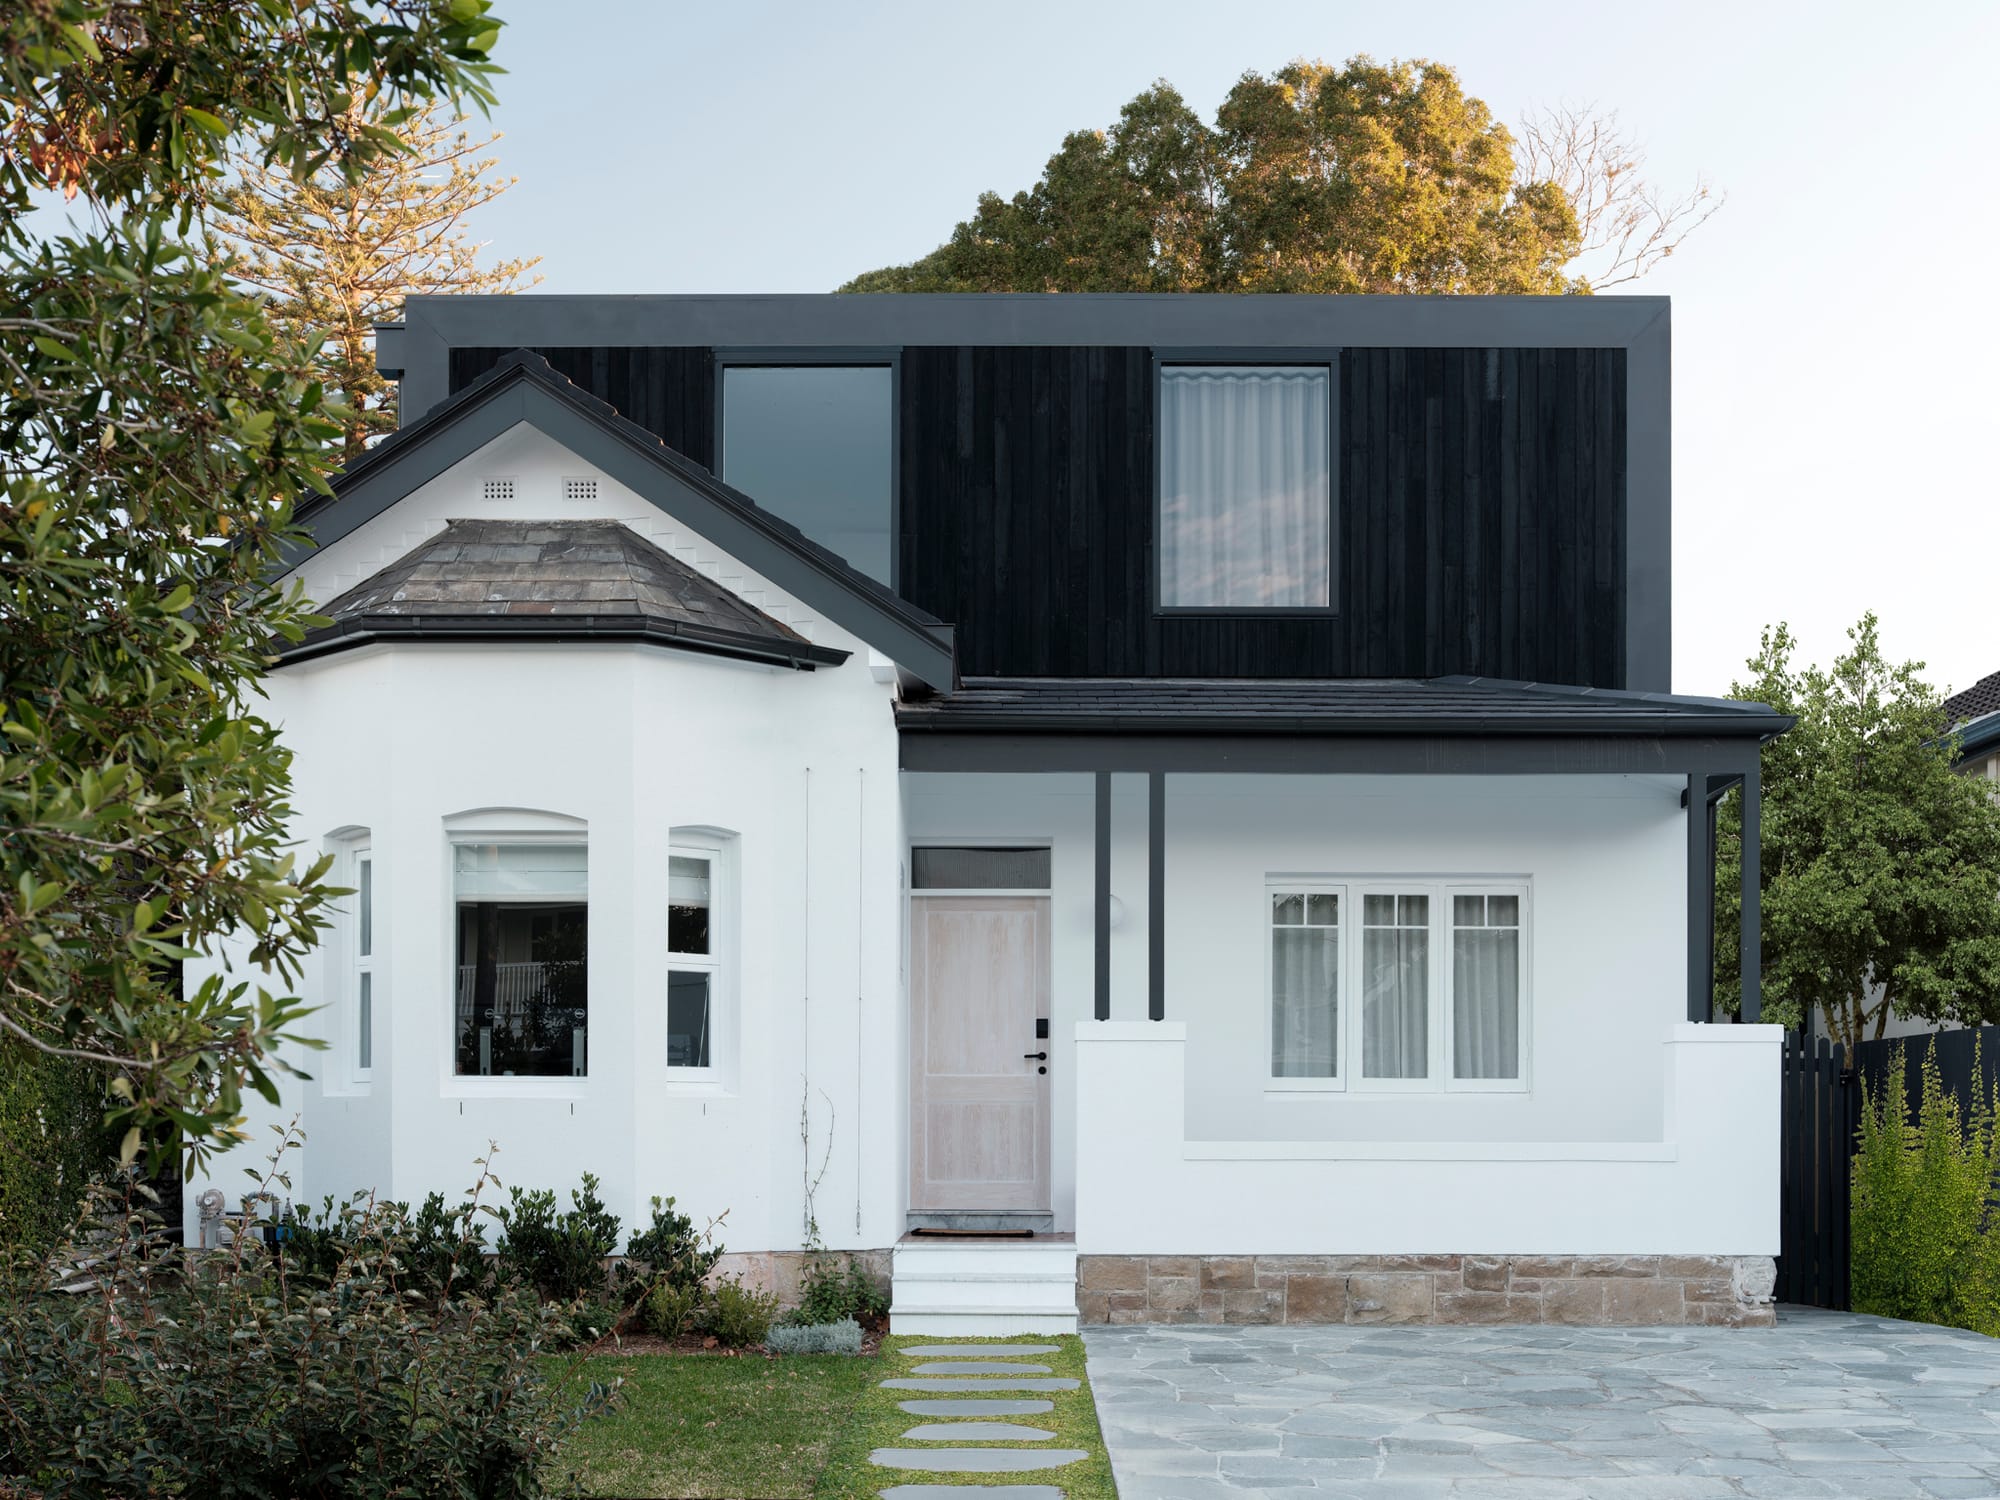 Bellevue House by Carla Middleton Architects. Photography by Tom Ferguson. Front facade of double storey residential home. Federation-style white ground floor. Contemporary black clad second storey. 